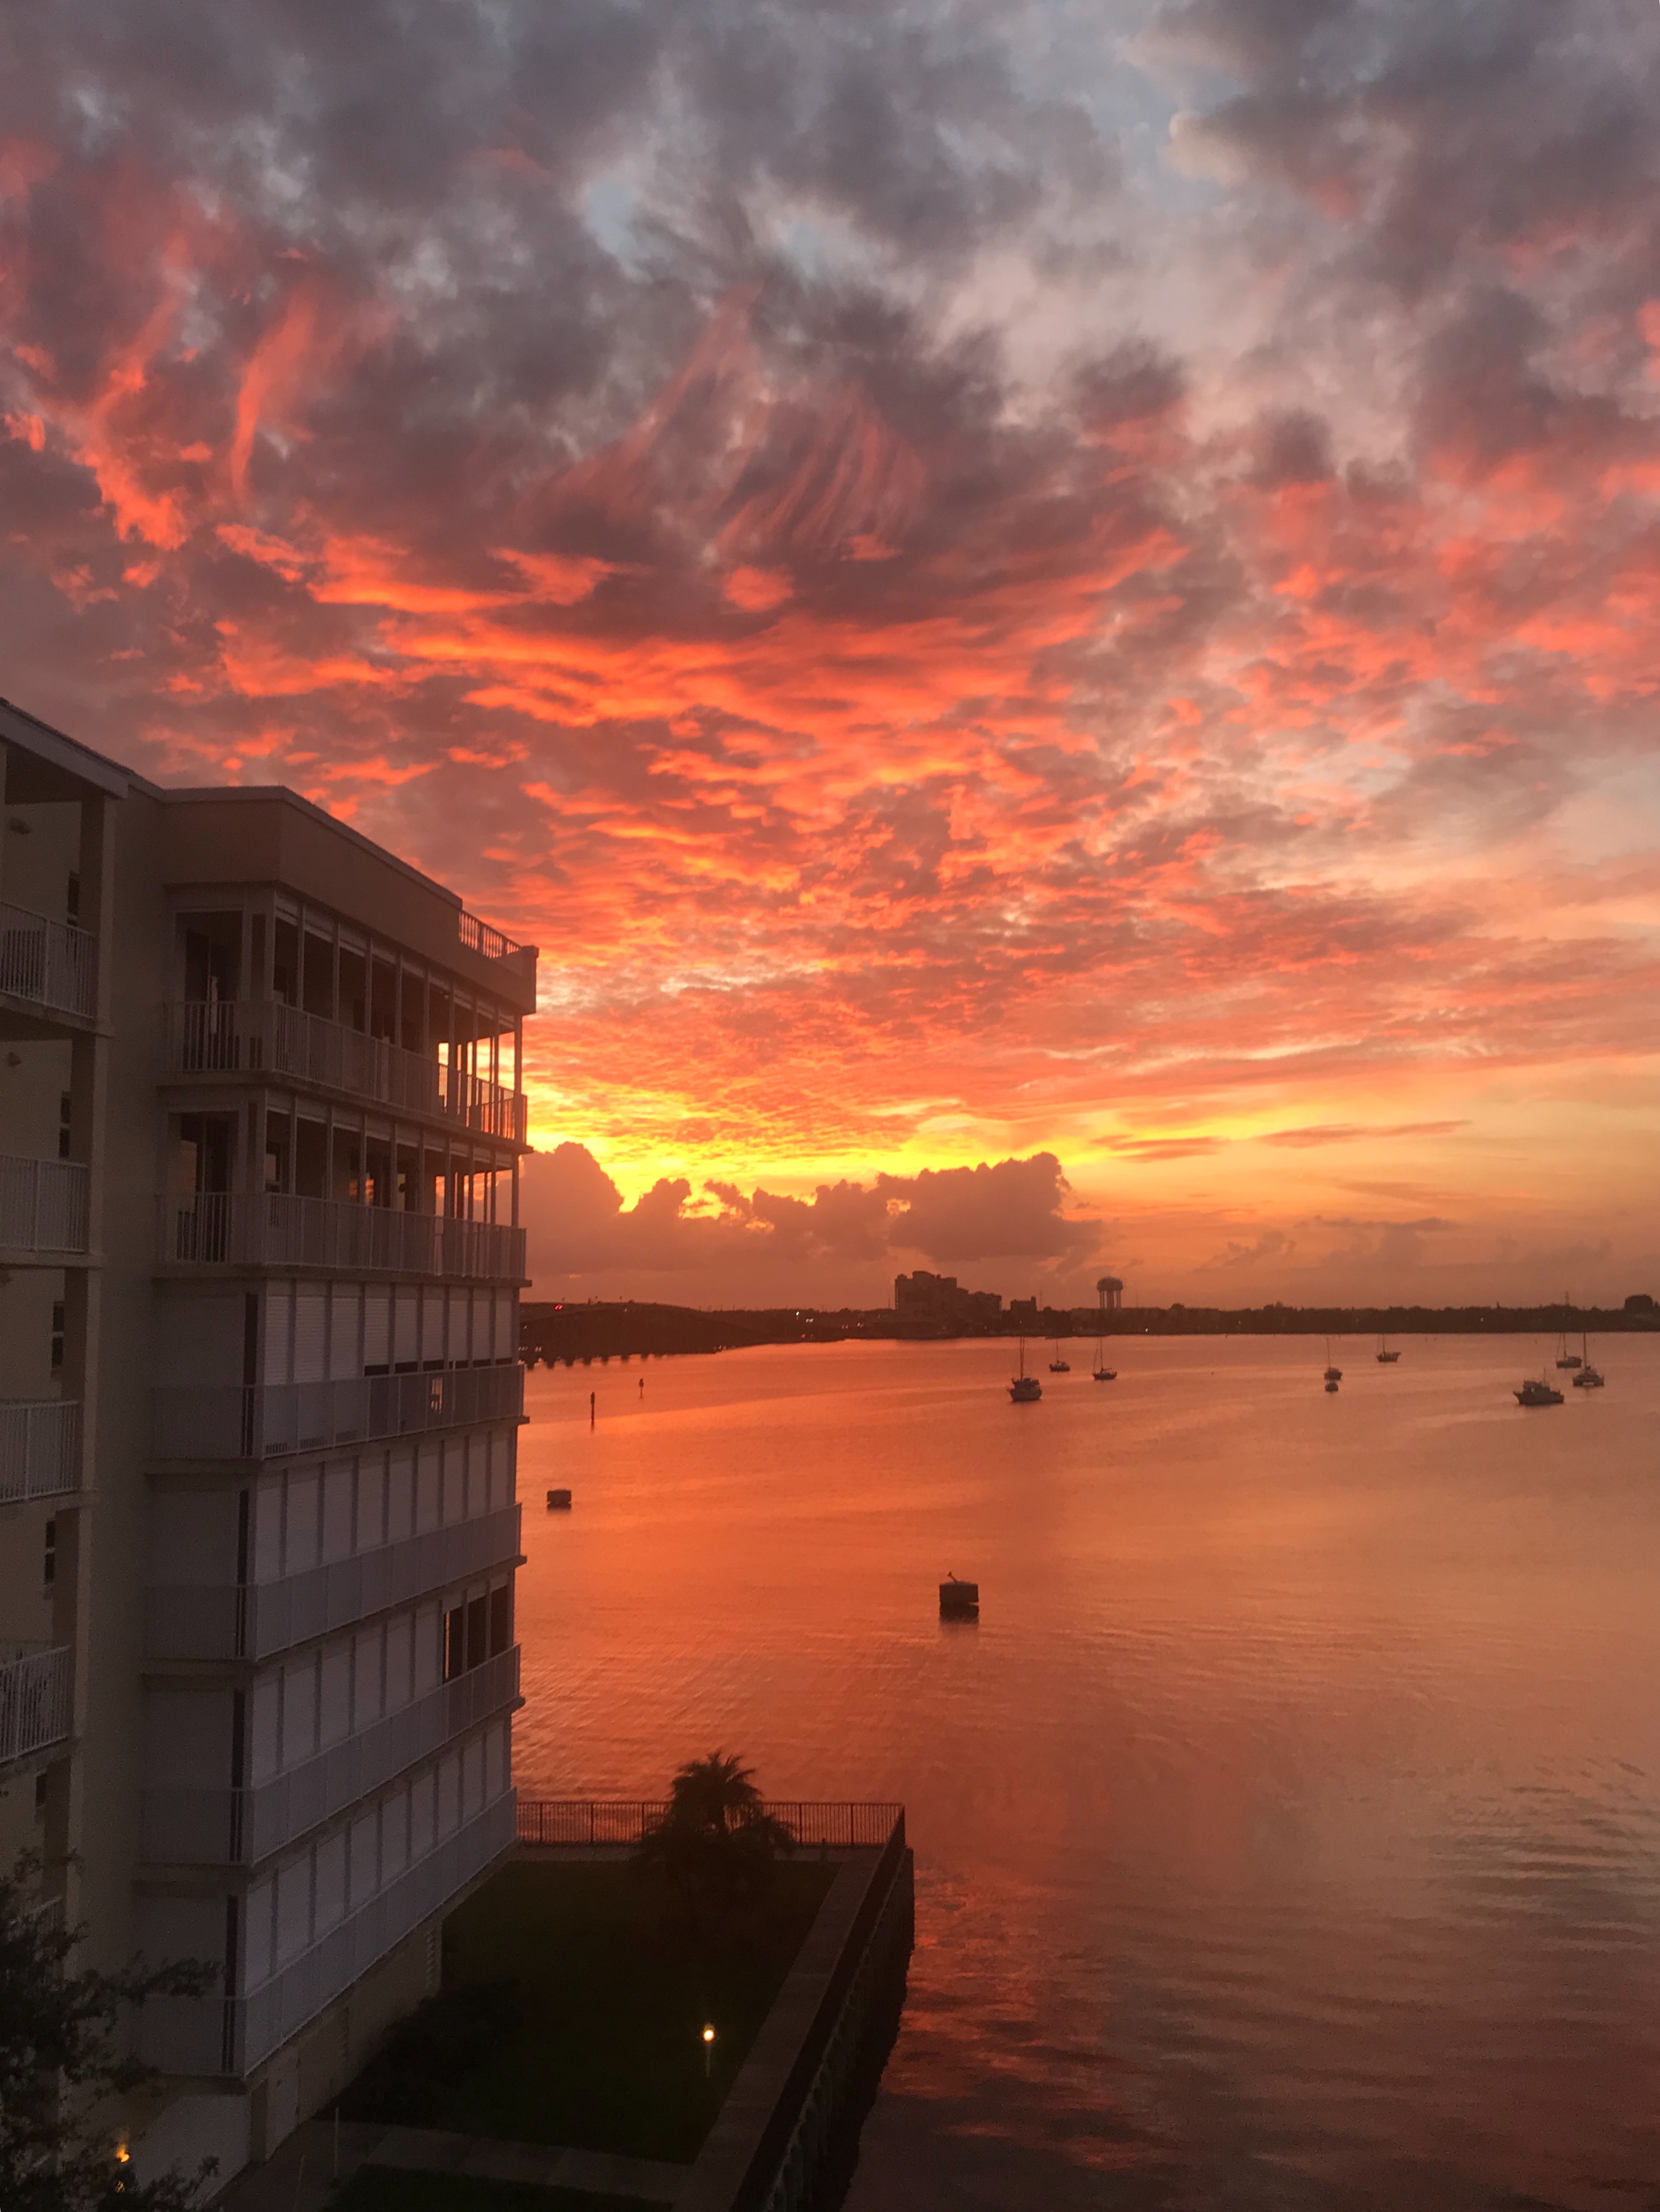 Sunset over Cocoa by 490 resident JM (iPhone 7)